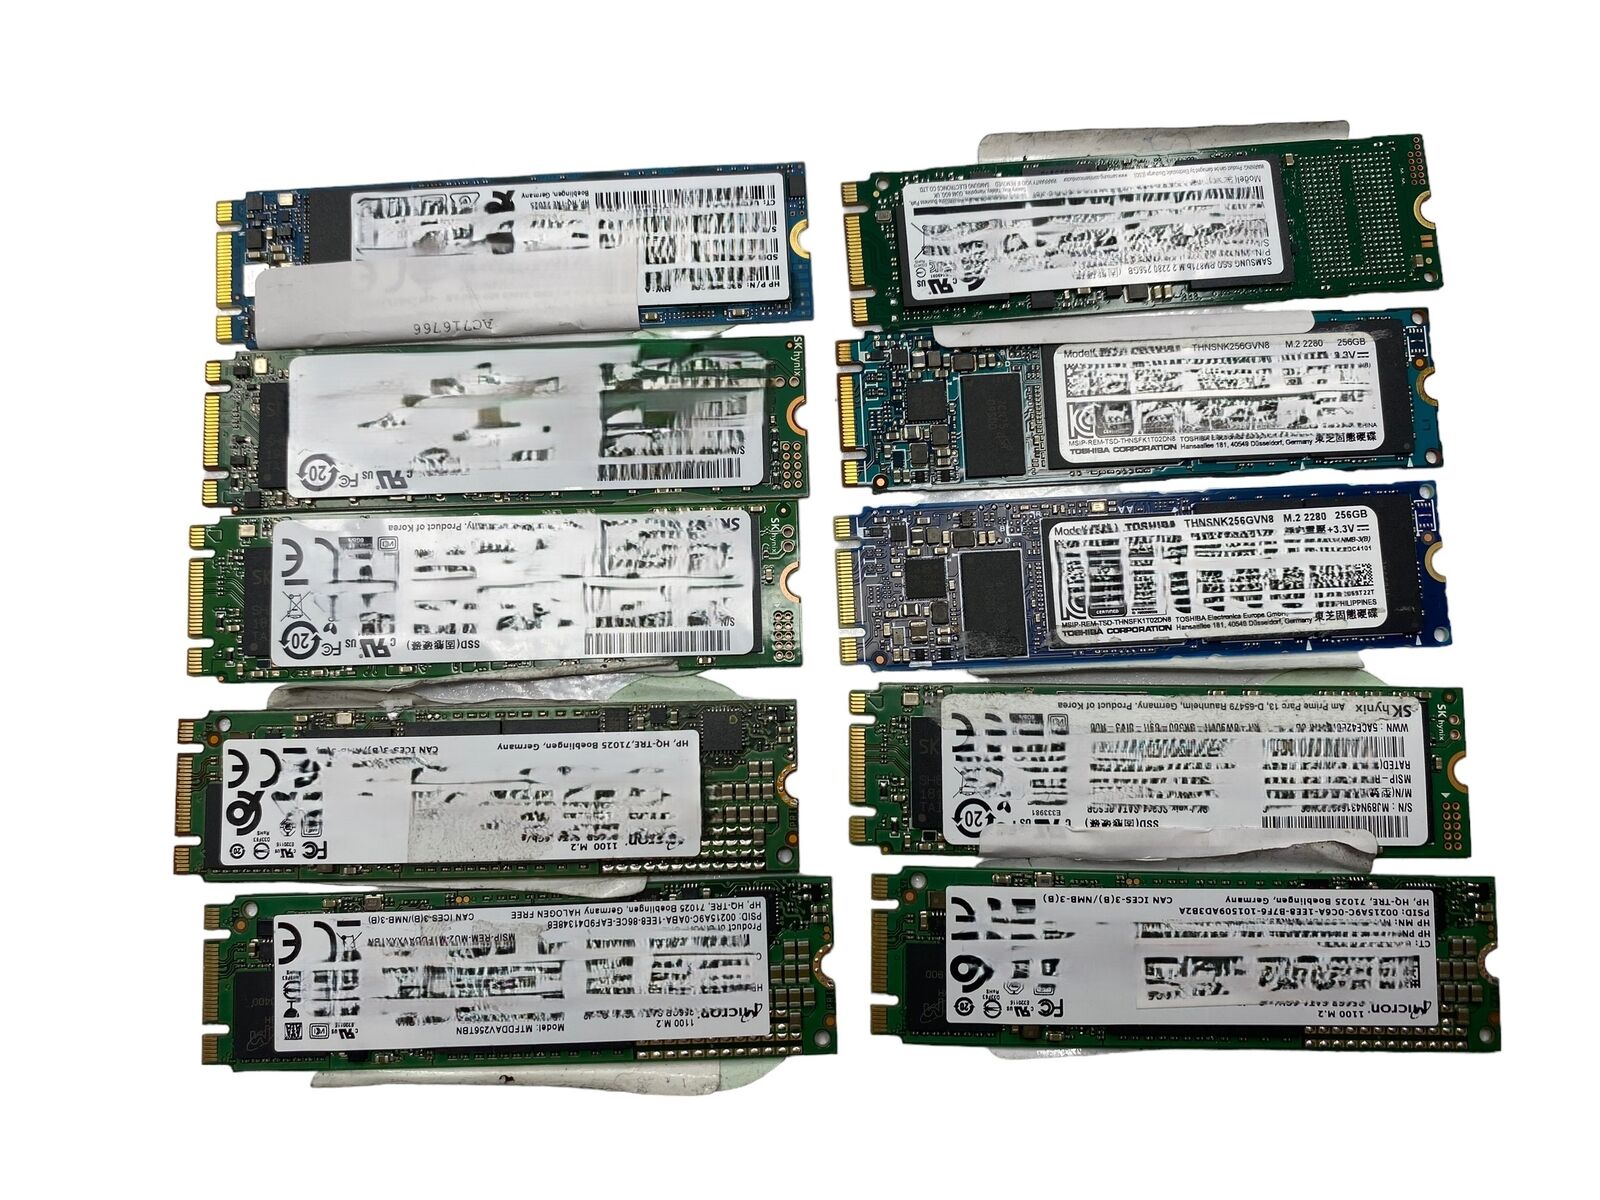 Lot of 10 Mixed Brand Model 256GB SATA M.2 SSD Solid State Drive